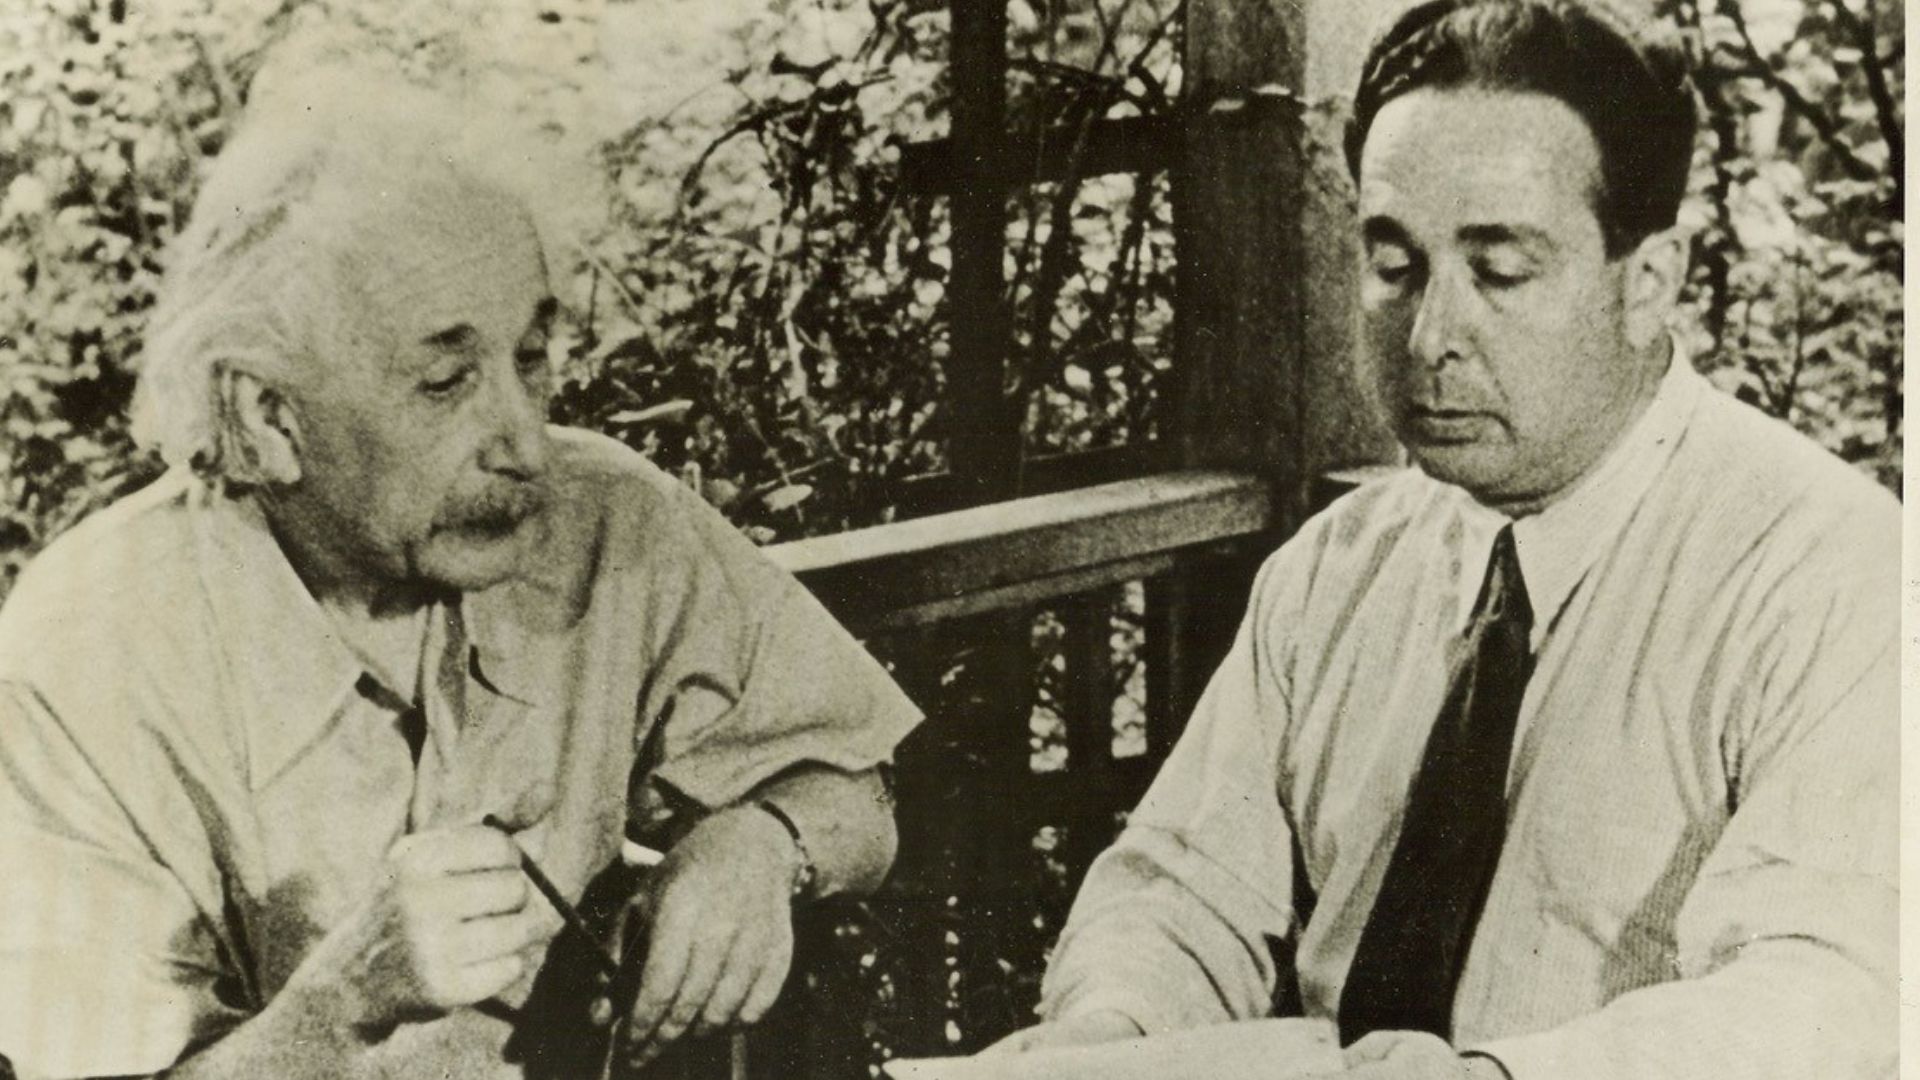 Albert Einstein (left) and Leo Szilard (right) drafting the letter to President Roosevelt that prompted the Manhattan Project.